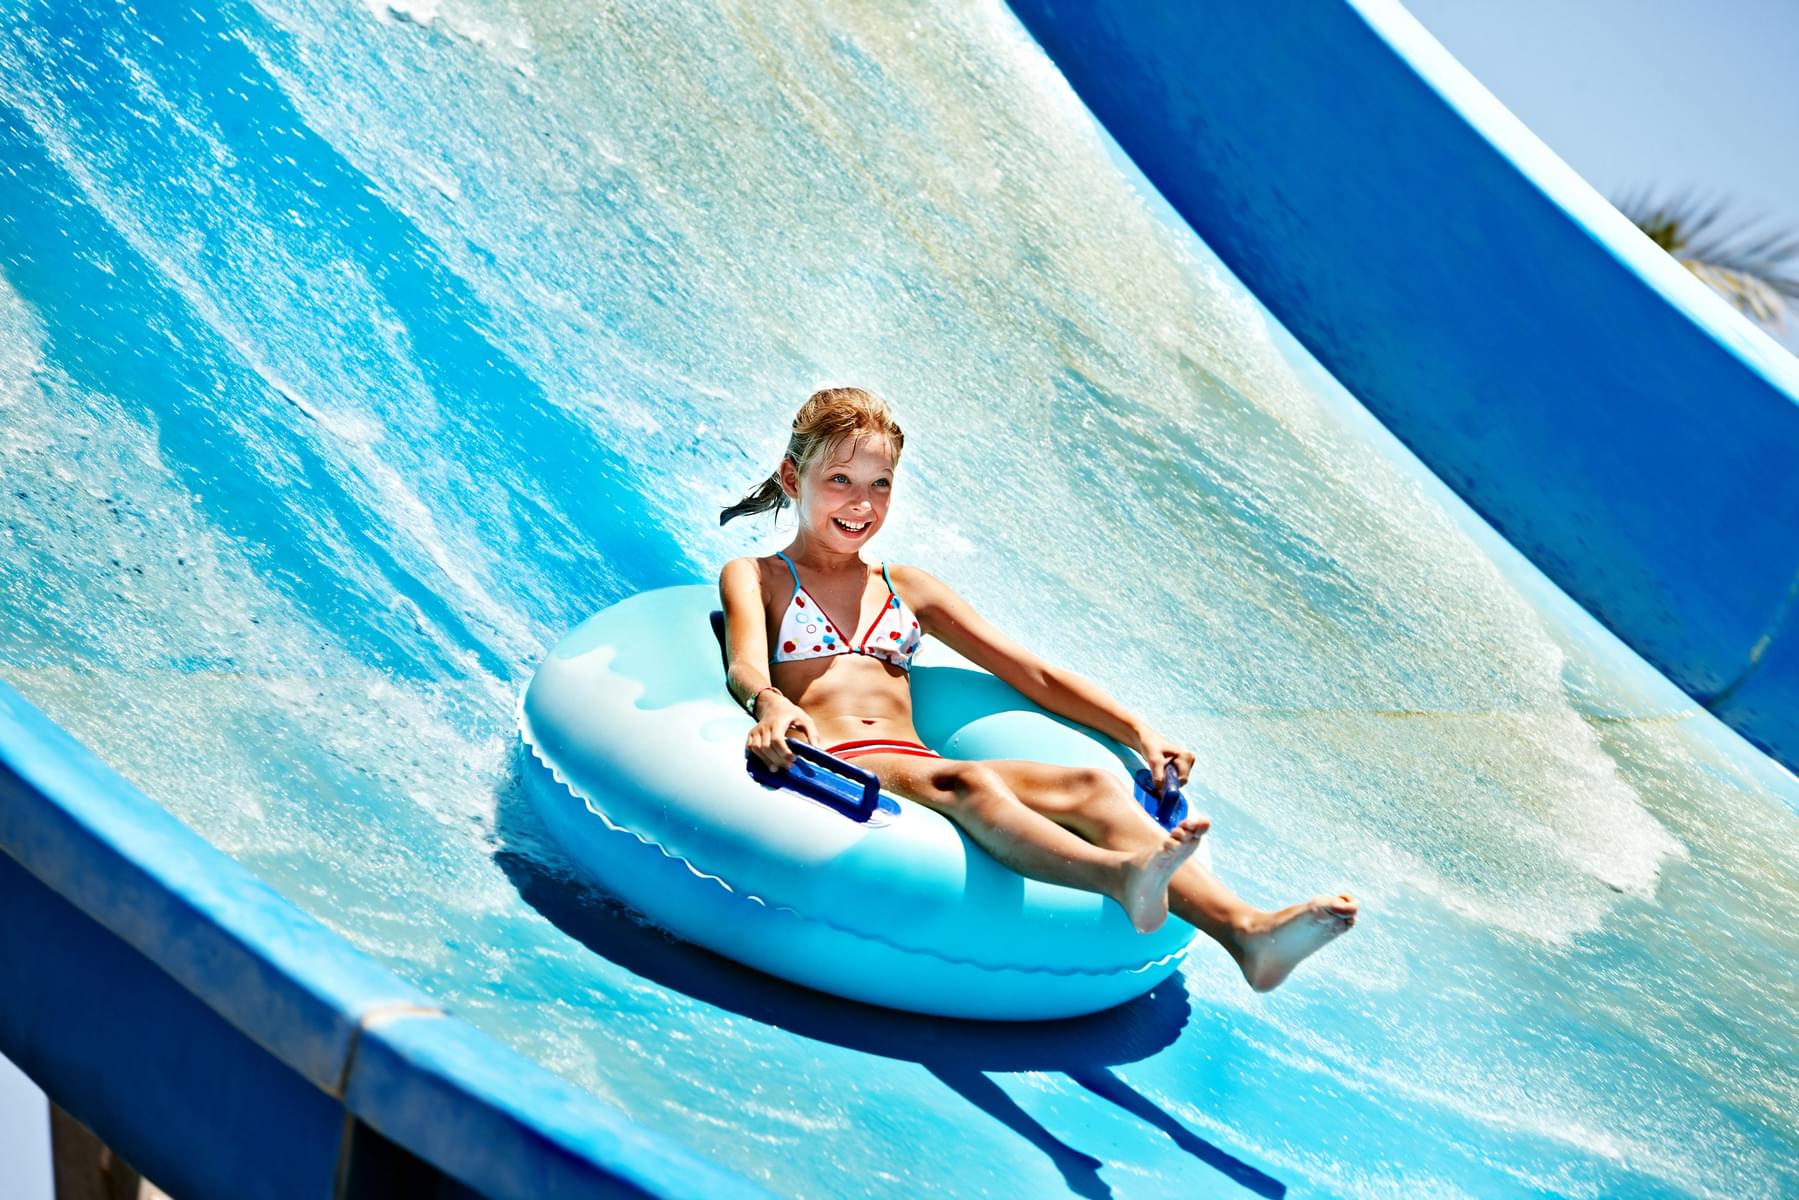 Adventure Cove Waterpark One-day Admission Ticket